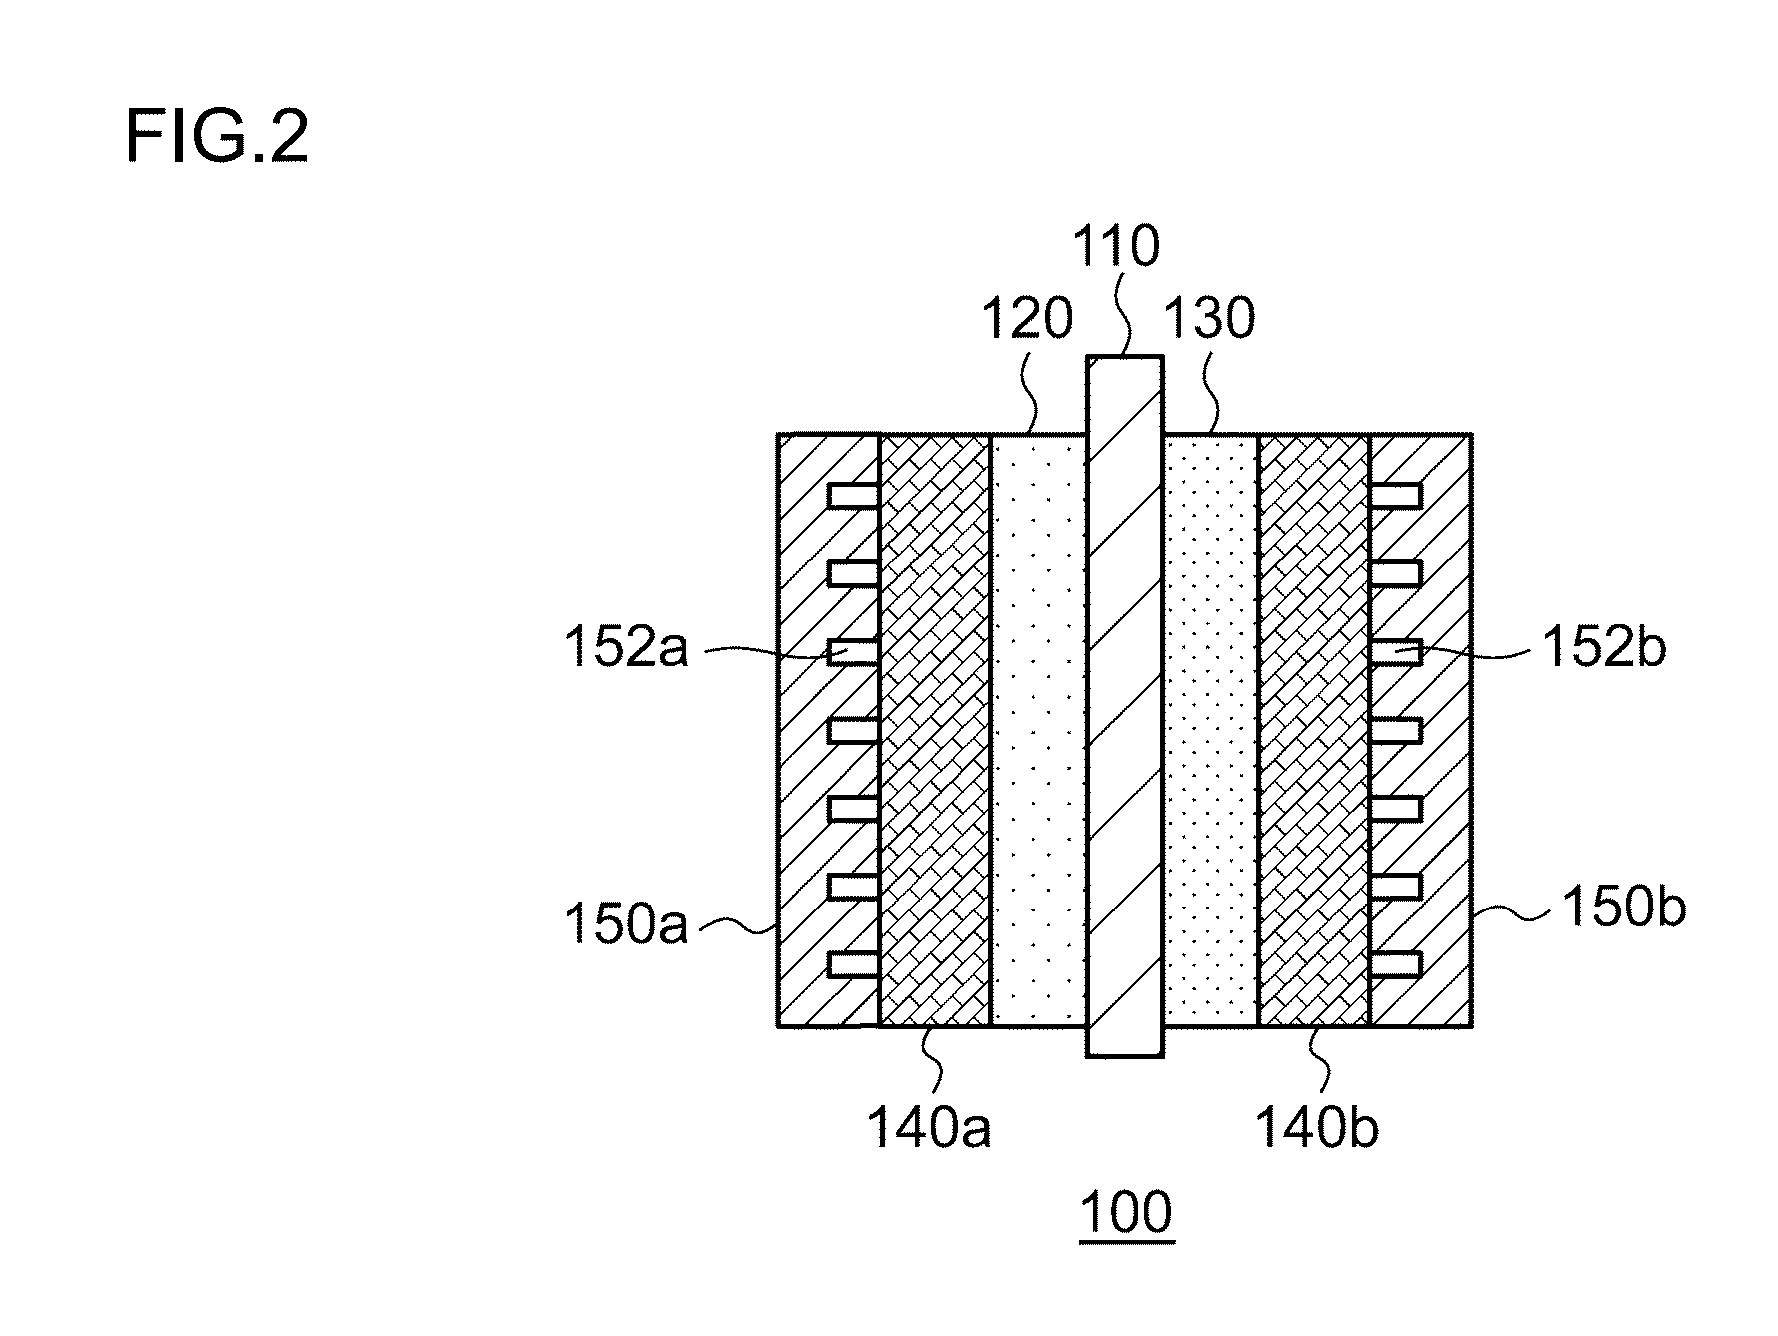 Electrochemical reduction device and method for manufacturing hydride of aromatic compound